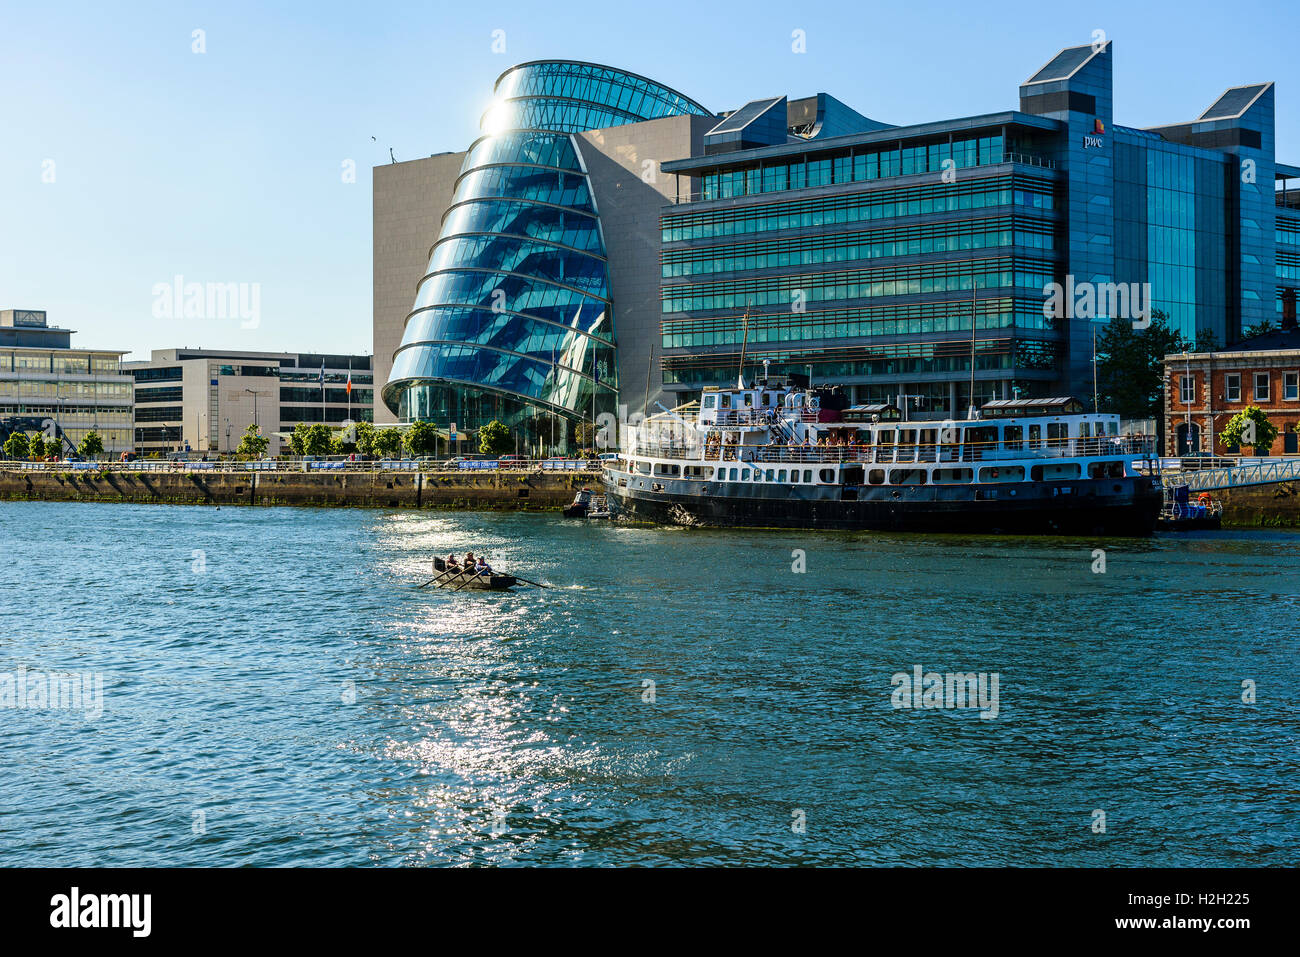 Dragon boat on River Liffey Dublin Ireland with Convention Centre Dublin, offices of pwc, and MV Cill Airne floating Restaurant Stock Photo